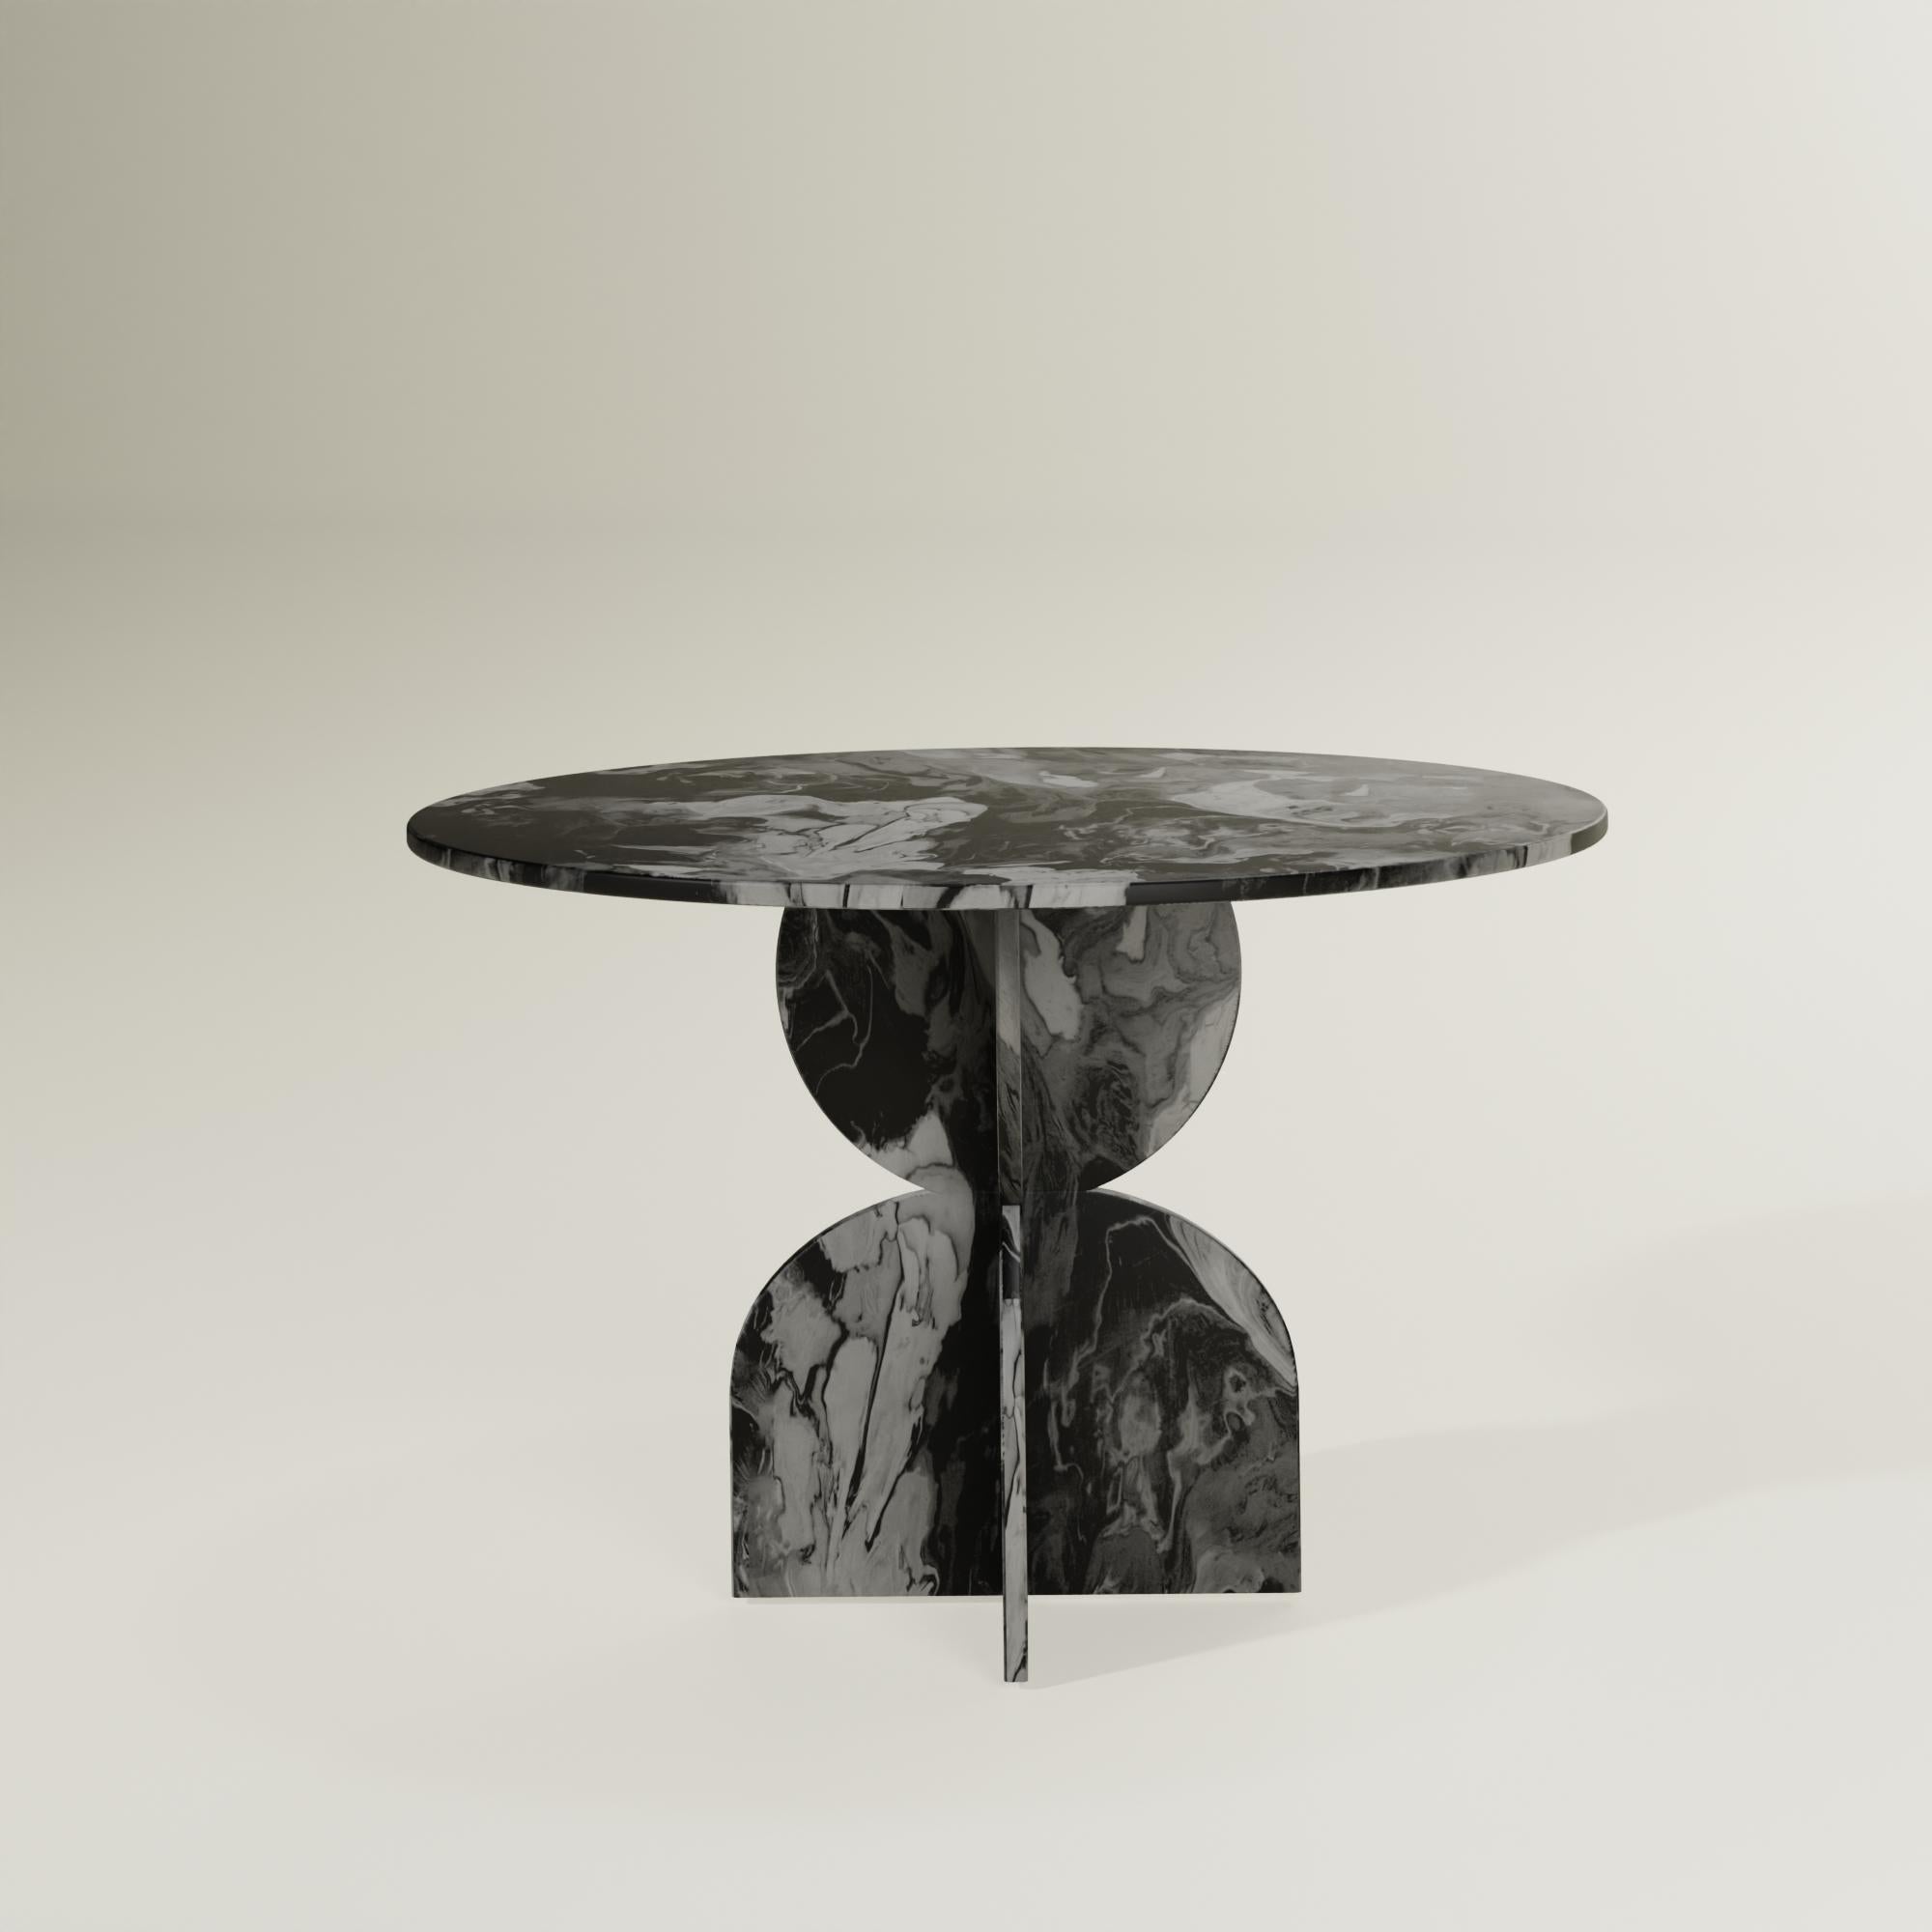 Modern Contemporary Black Round Table Handcrafted 100% Recycled Plastic by Anqa Studios For Sale